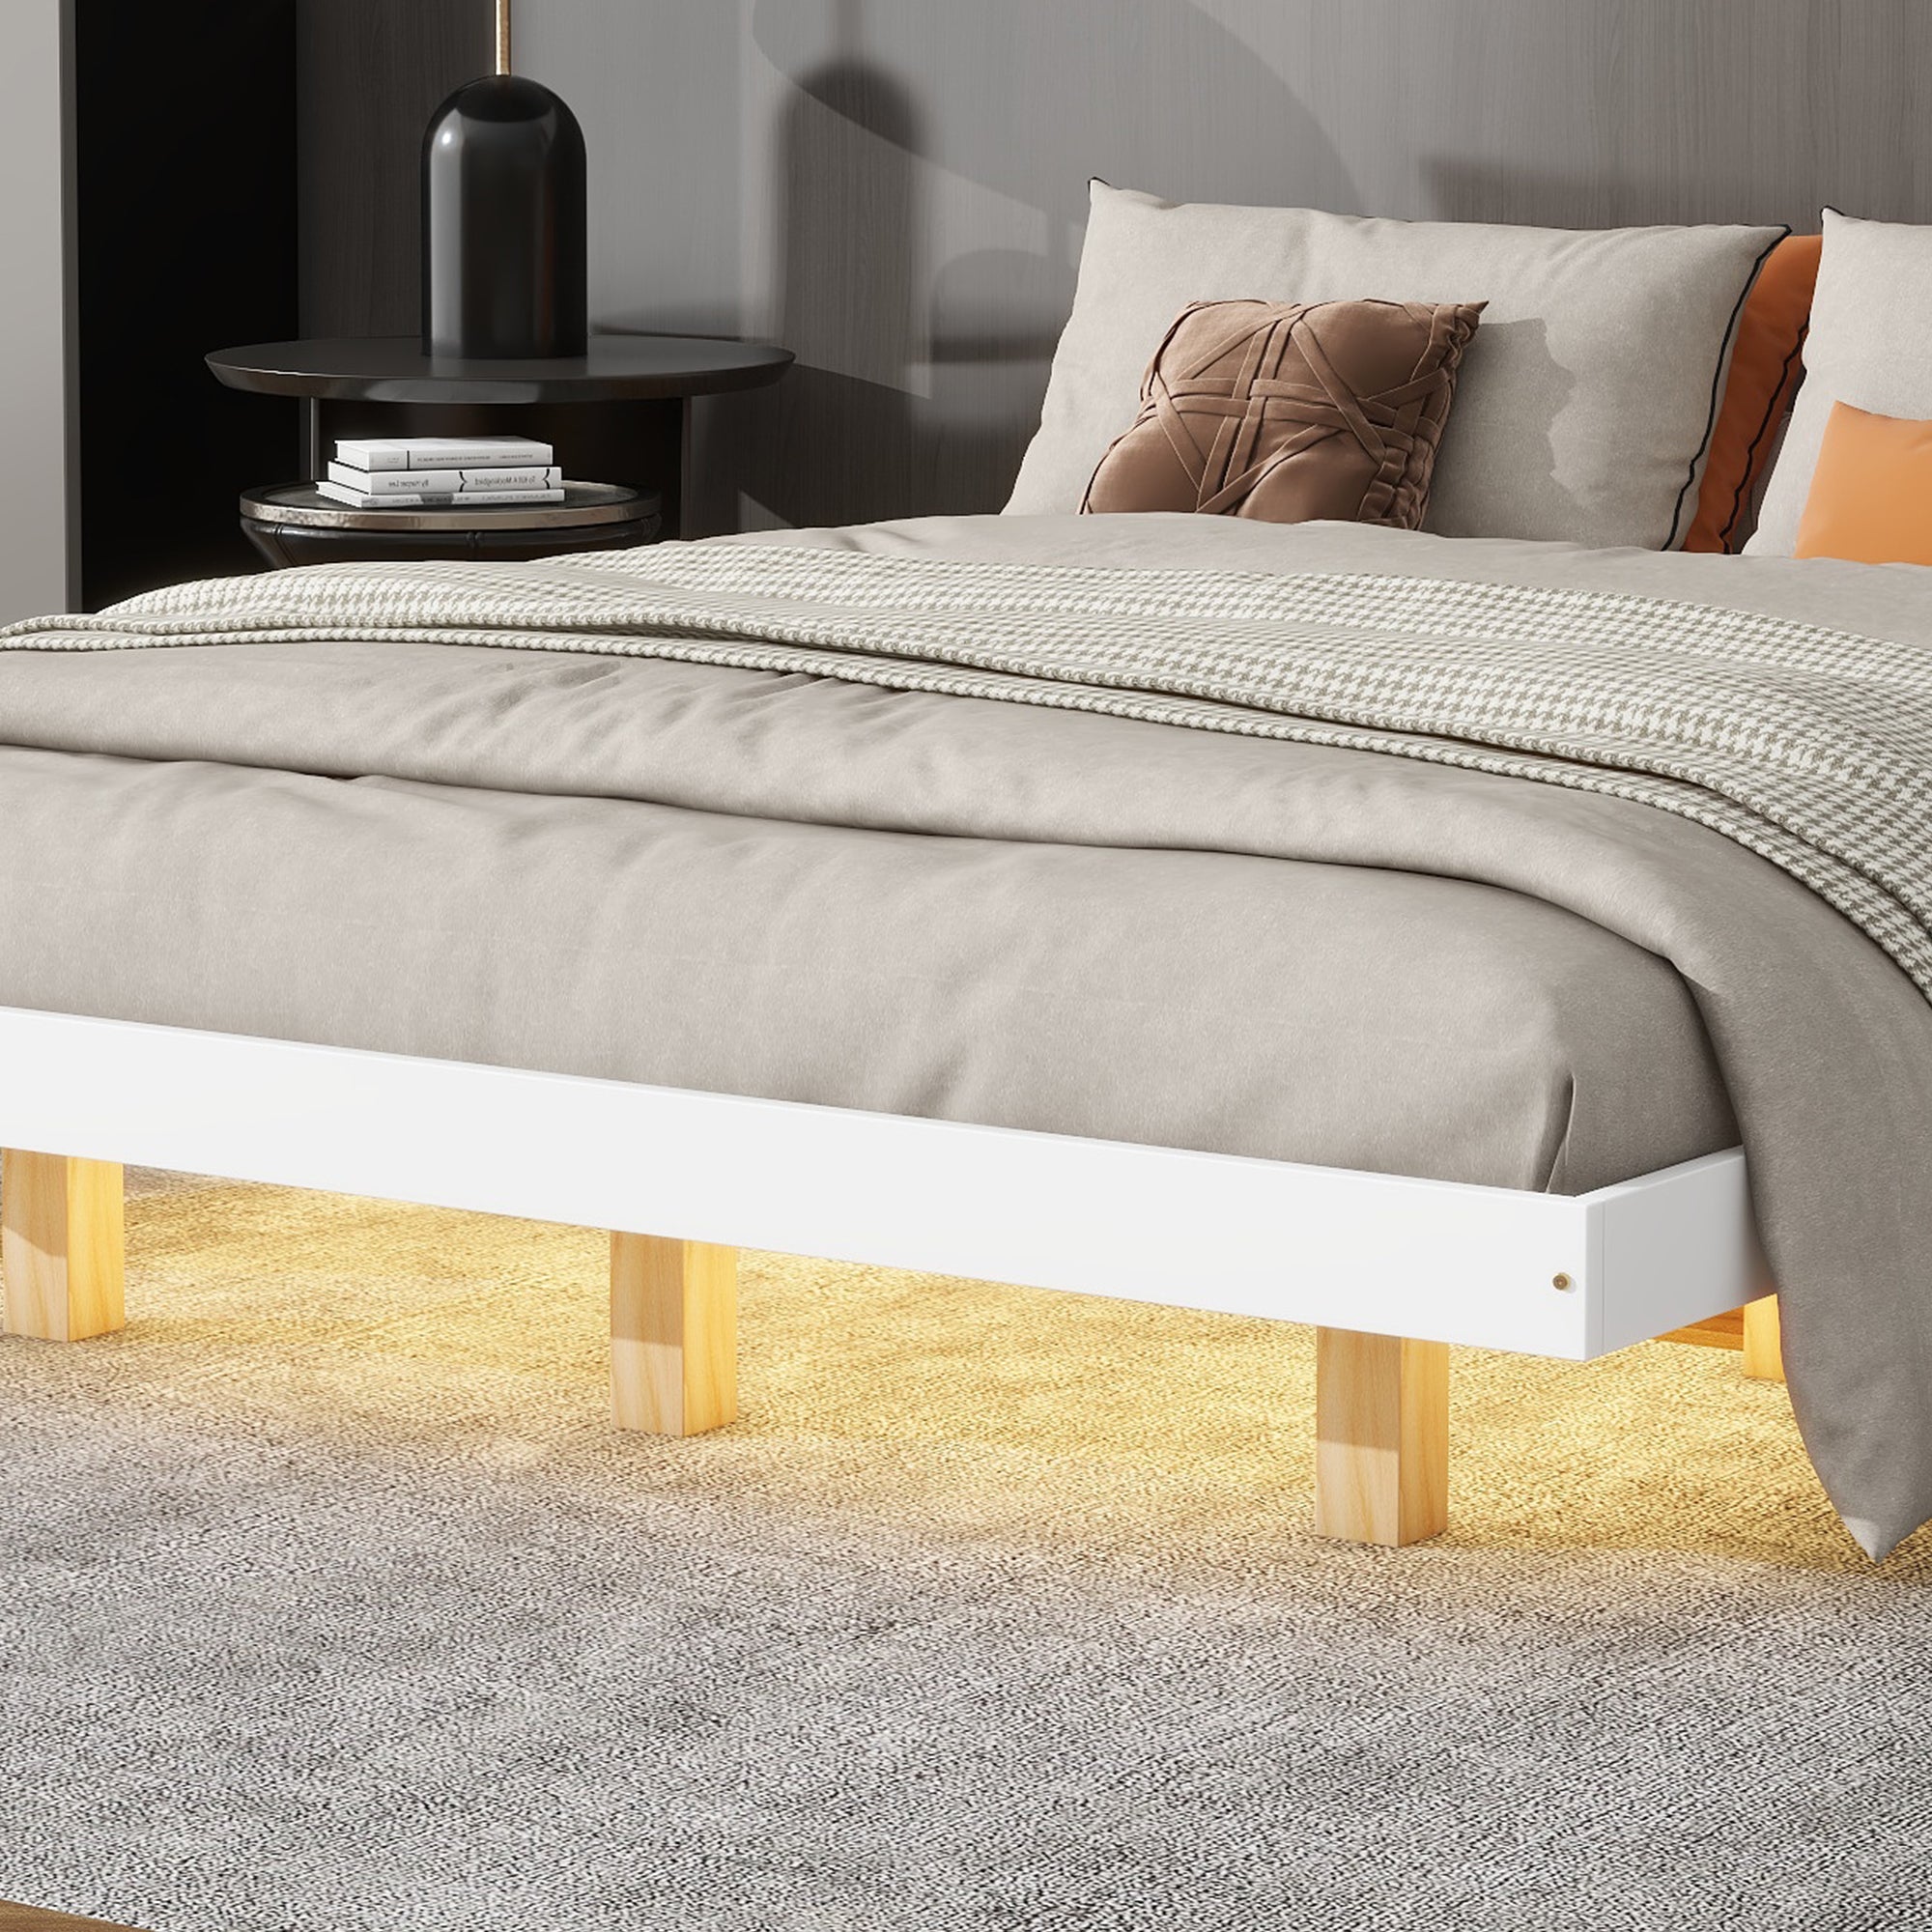 Queen Size Floating Bed with LED Lights Underneath, Modern Queen Size Low Profile Platform Bed with LED Lights